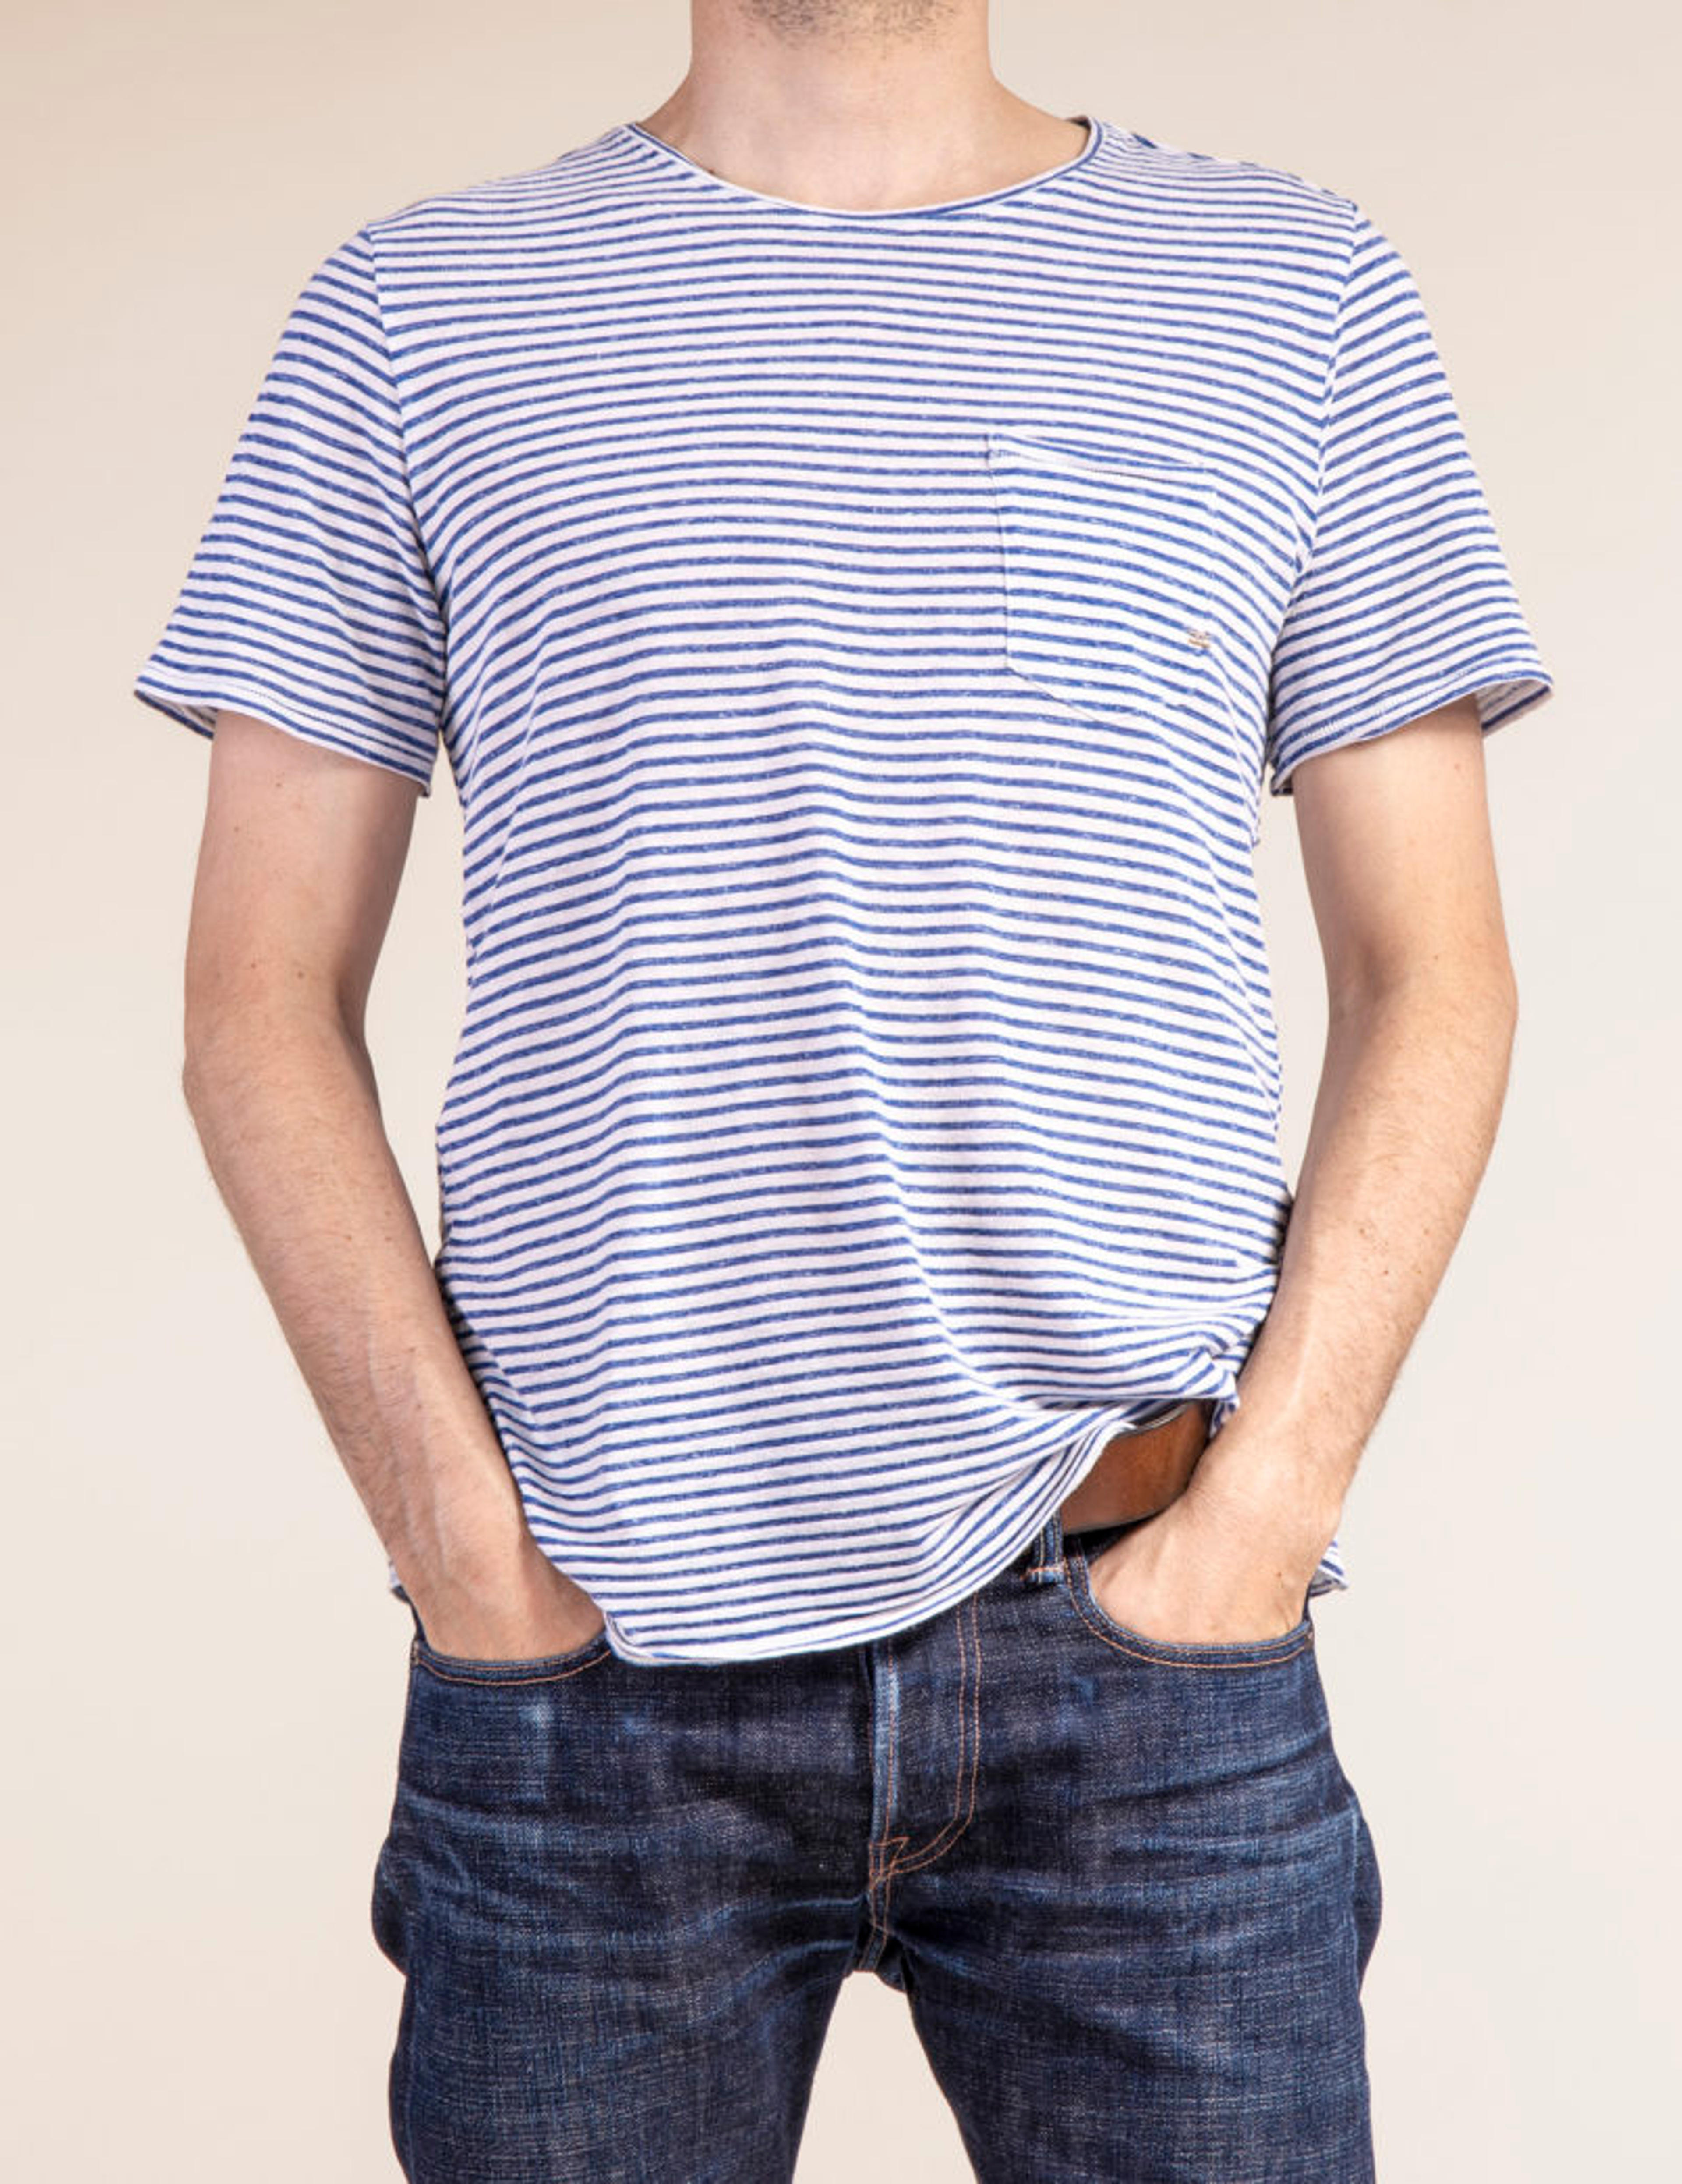 Soft striped t-shirt indigo relaxed fit 100% cotton heritage clothing